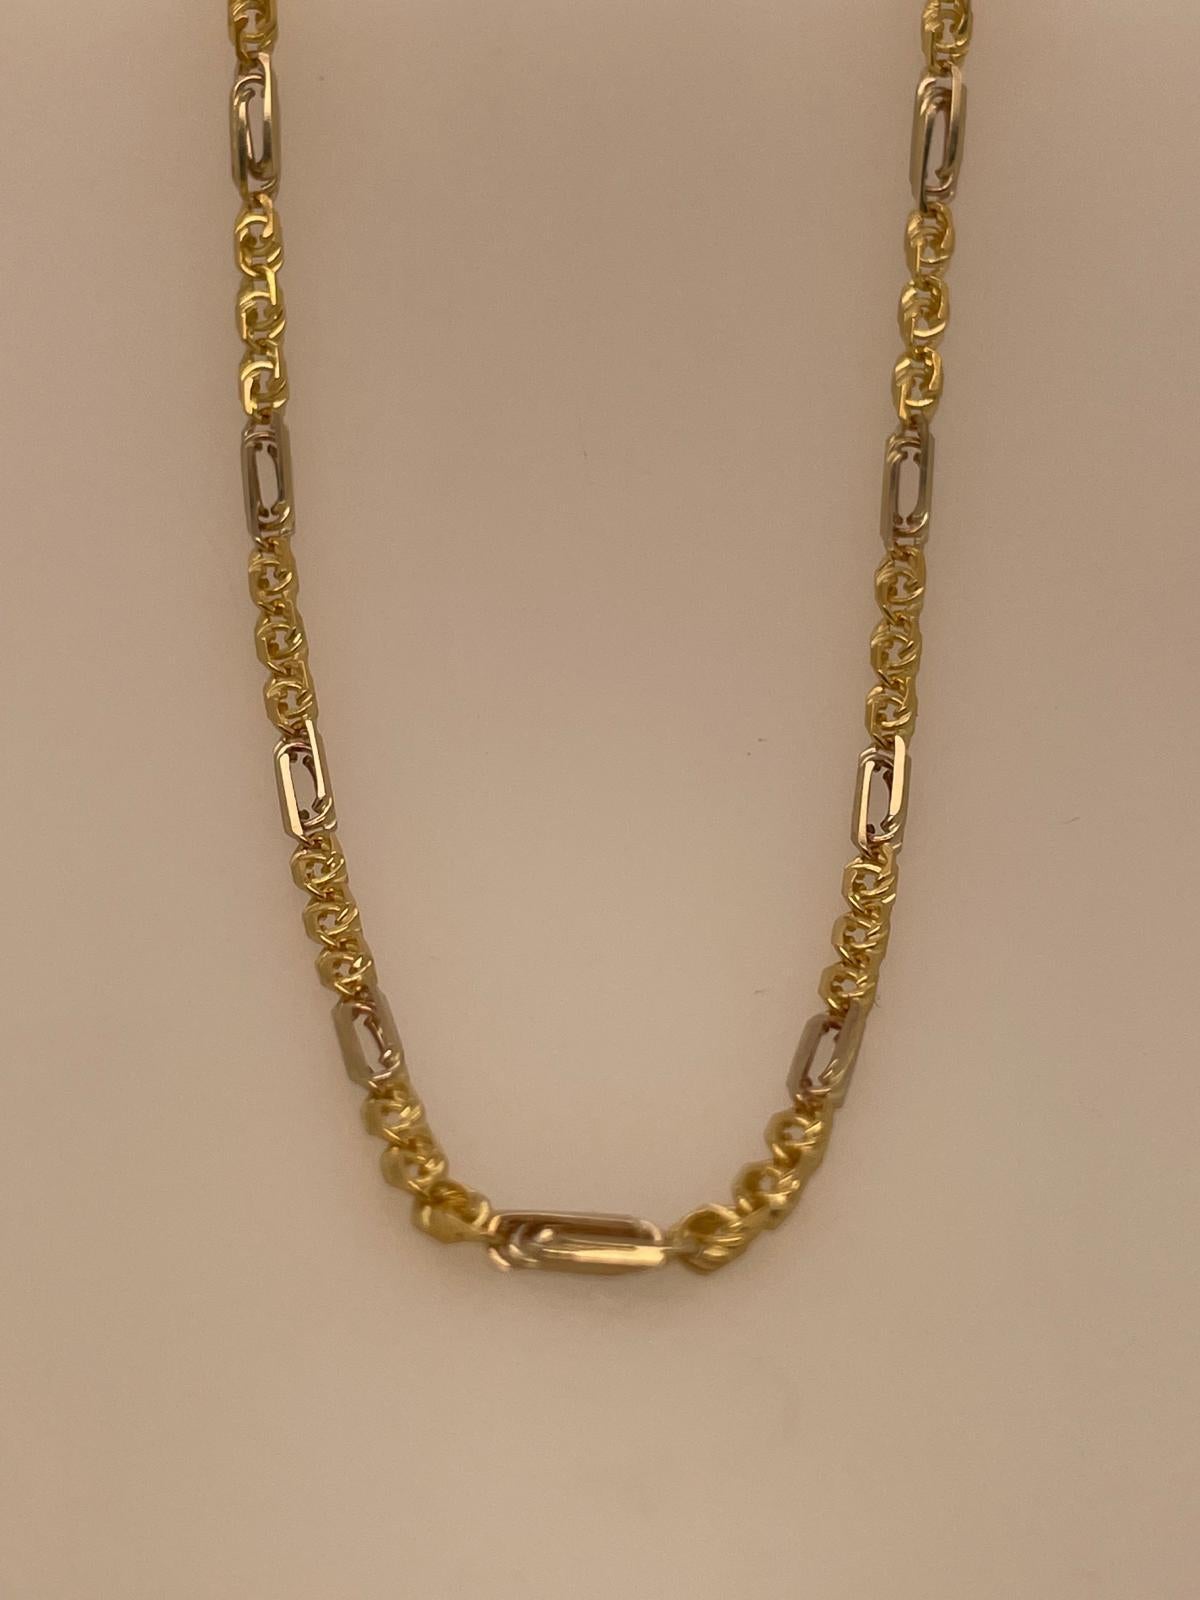 18k heavy fancy two tone style 18k yellow and 18k white gold chain  2